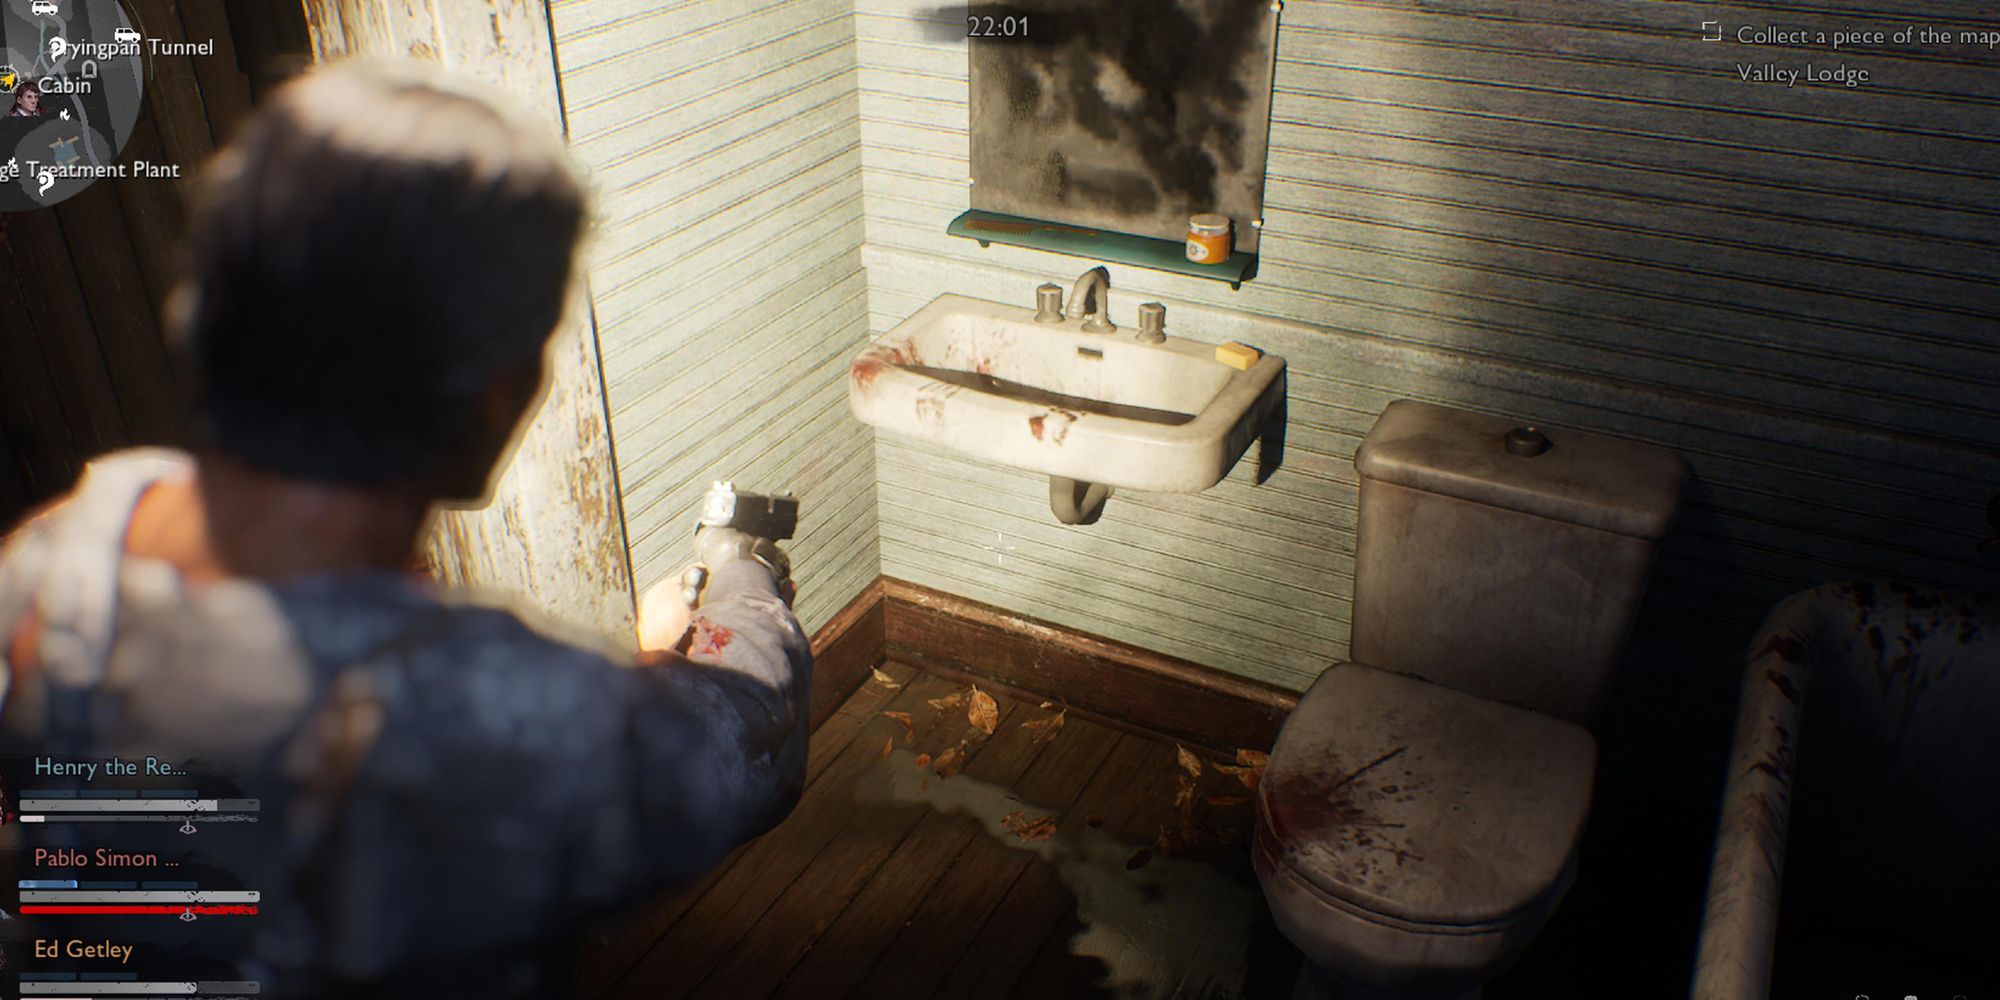 Evil Dead The Game, Ash aiming at bloody hand prints on sink.